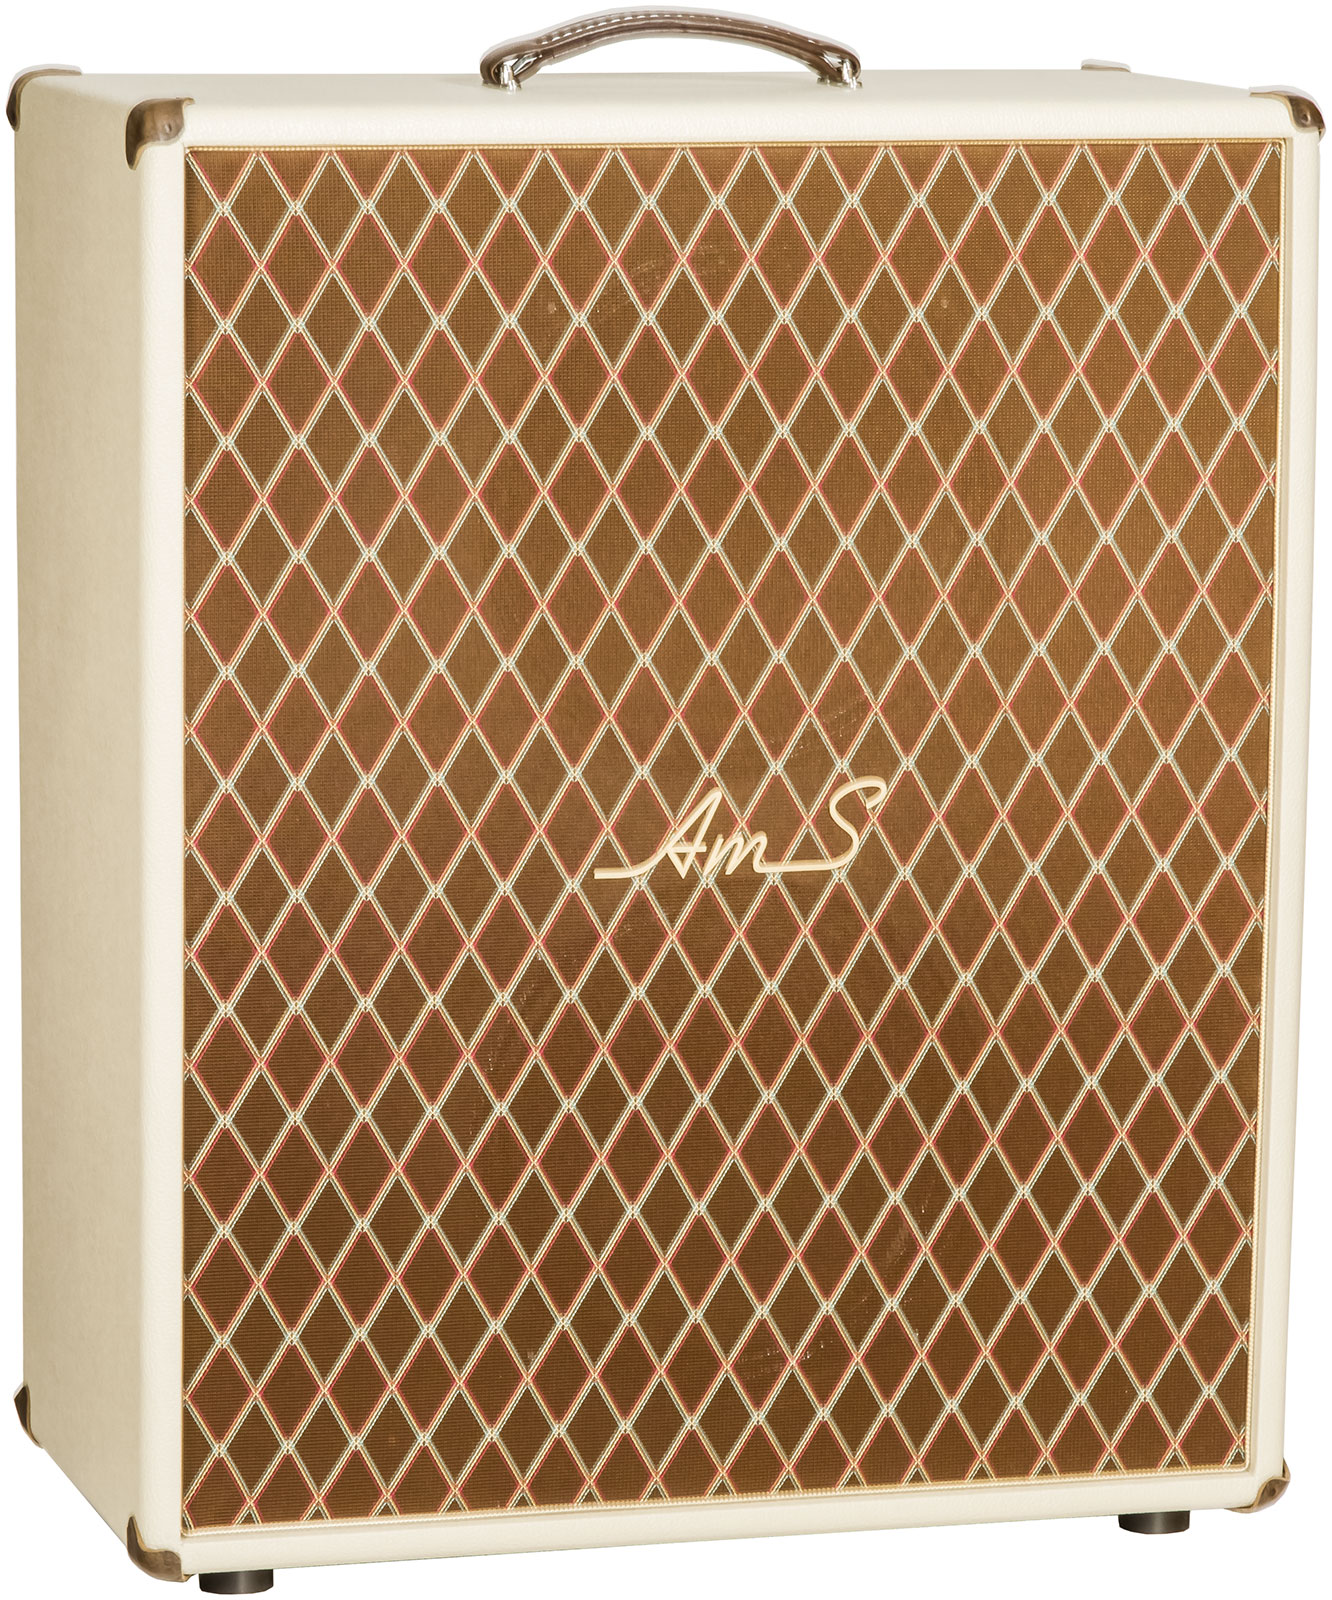 Ams Amplifiers The One 50 Analog Reverb Head 50w 6l6 + Cab 2x12 V30-ob White - Stack amplificador guitarra eléctrica - Variation 3